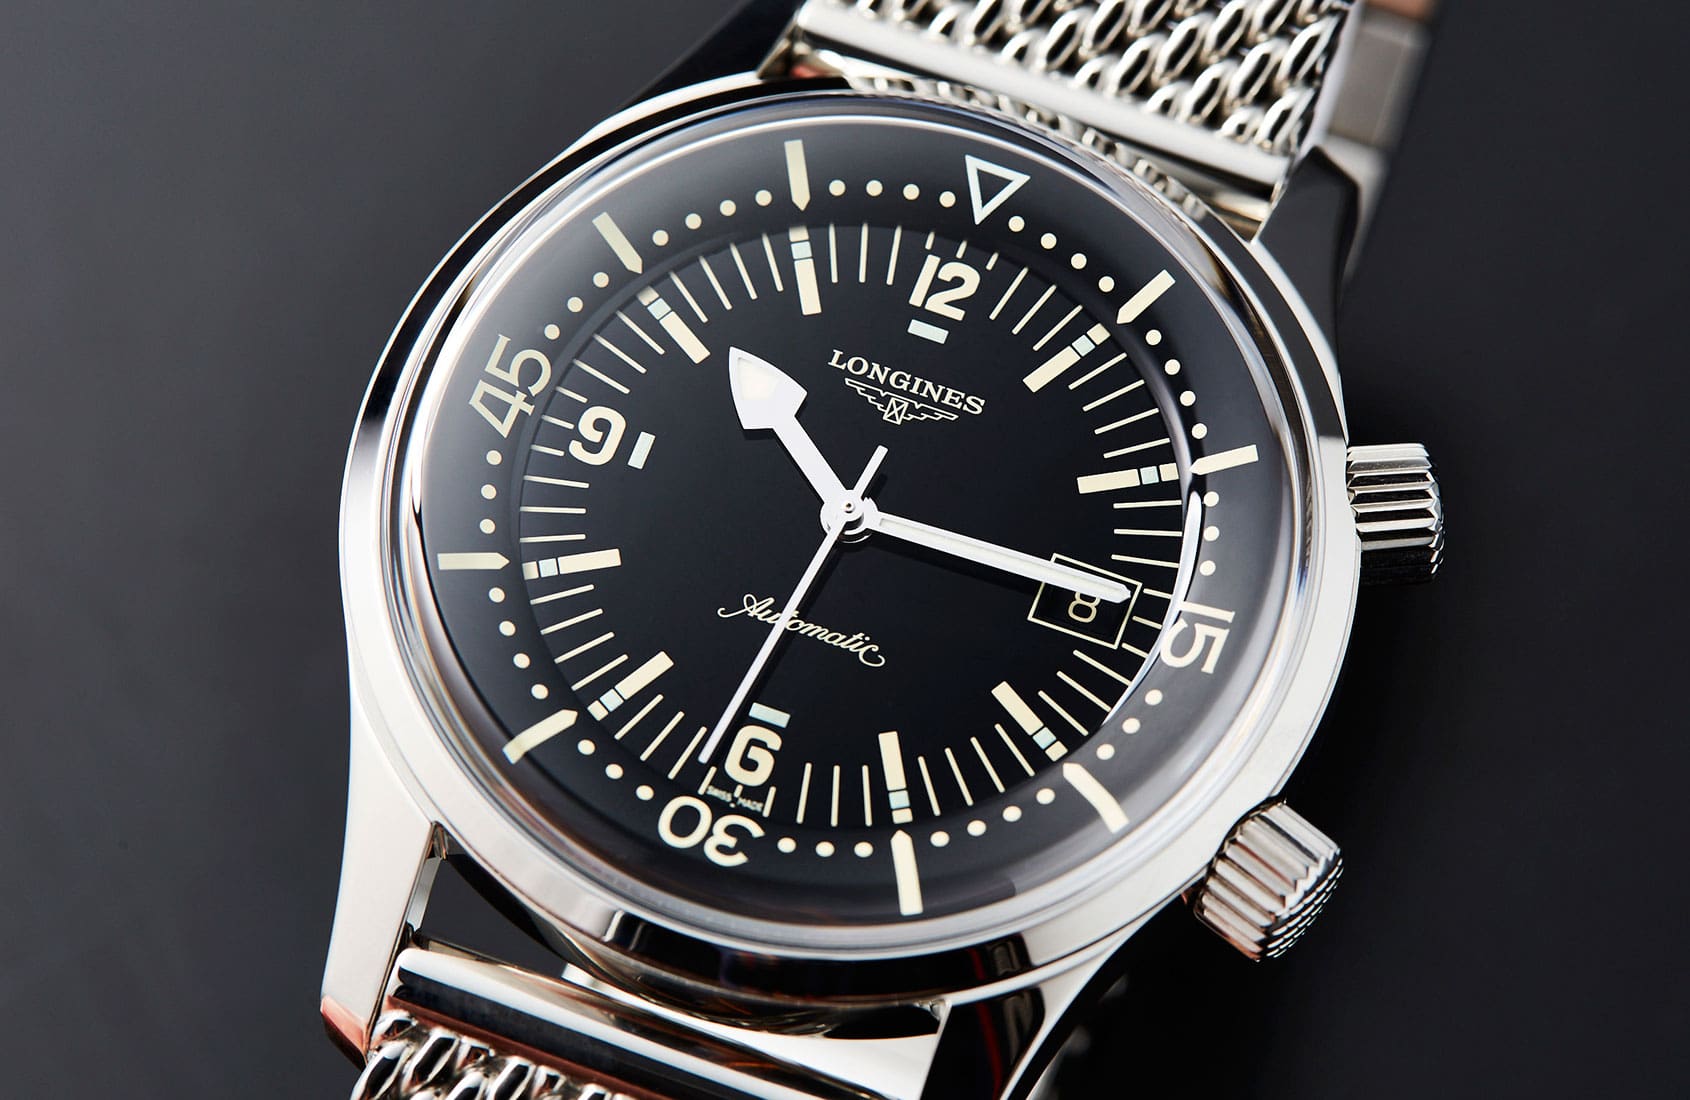 EDITOR’S PICK: Summer suited – the Longines Legend Diver